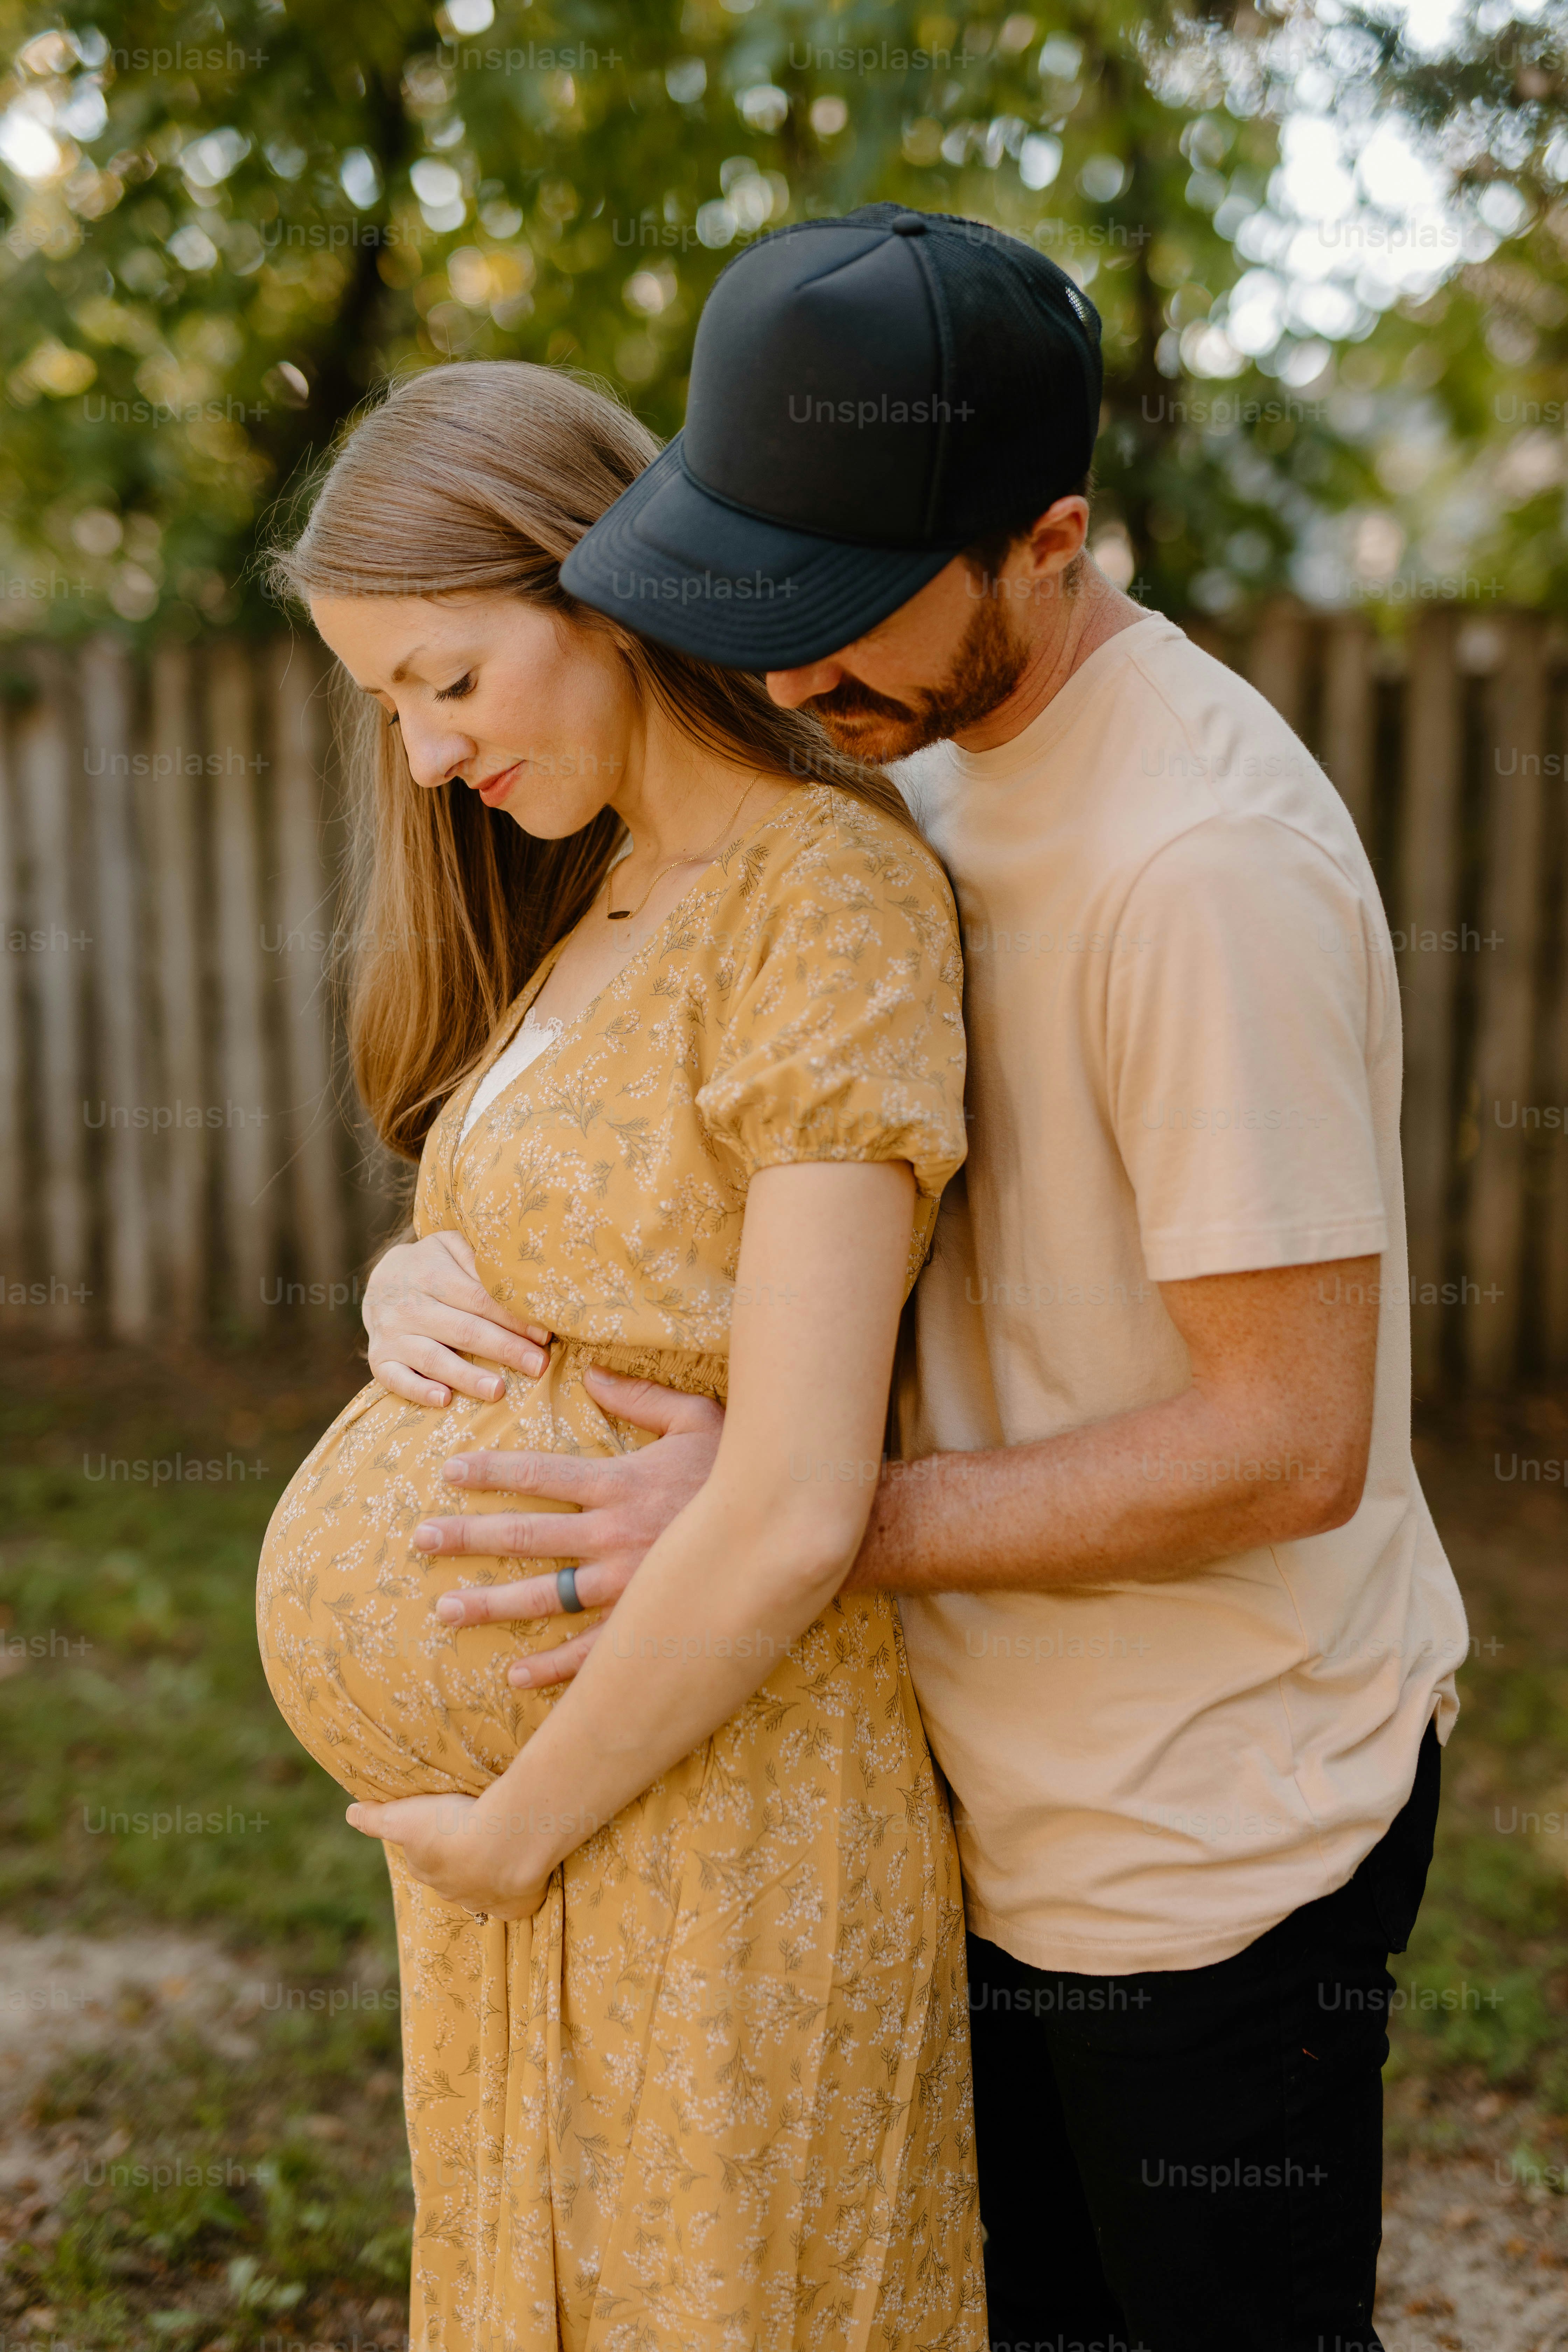 500+ Pregnant Woman Pictures Download Free Images on Unsplash